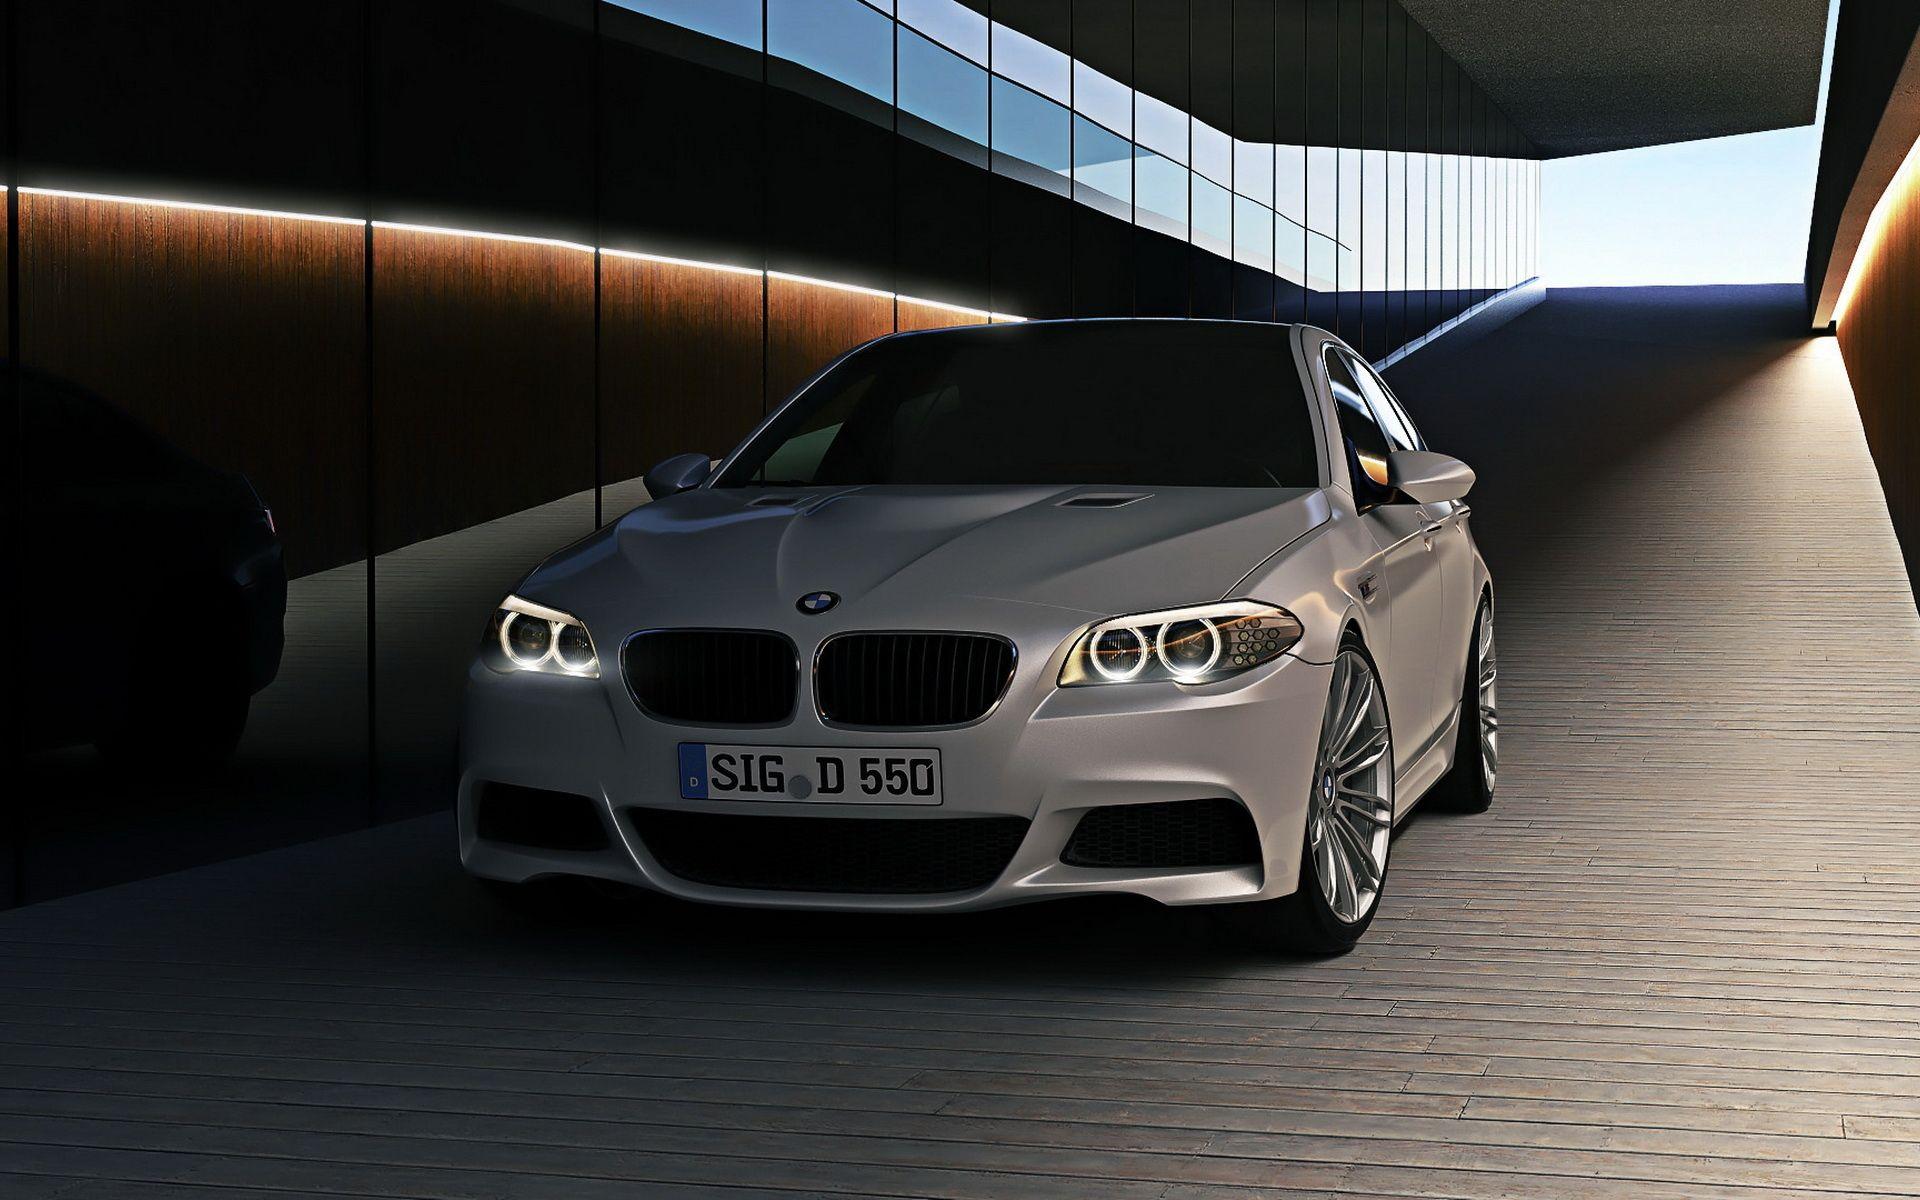 BMW M5 F10 wallpaper and image, picture, photo